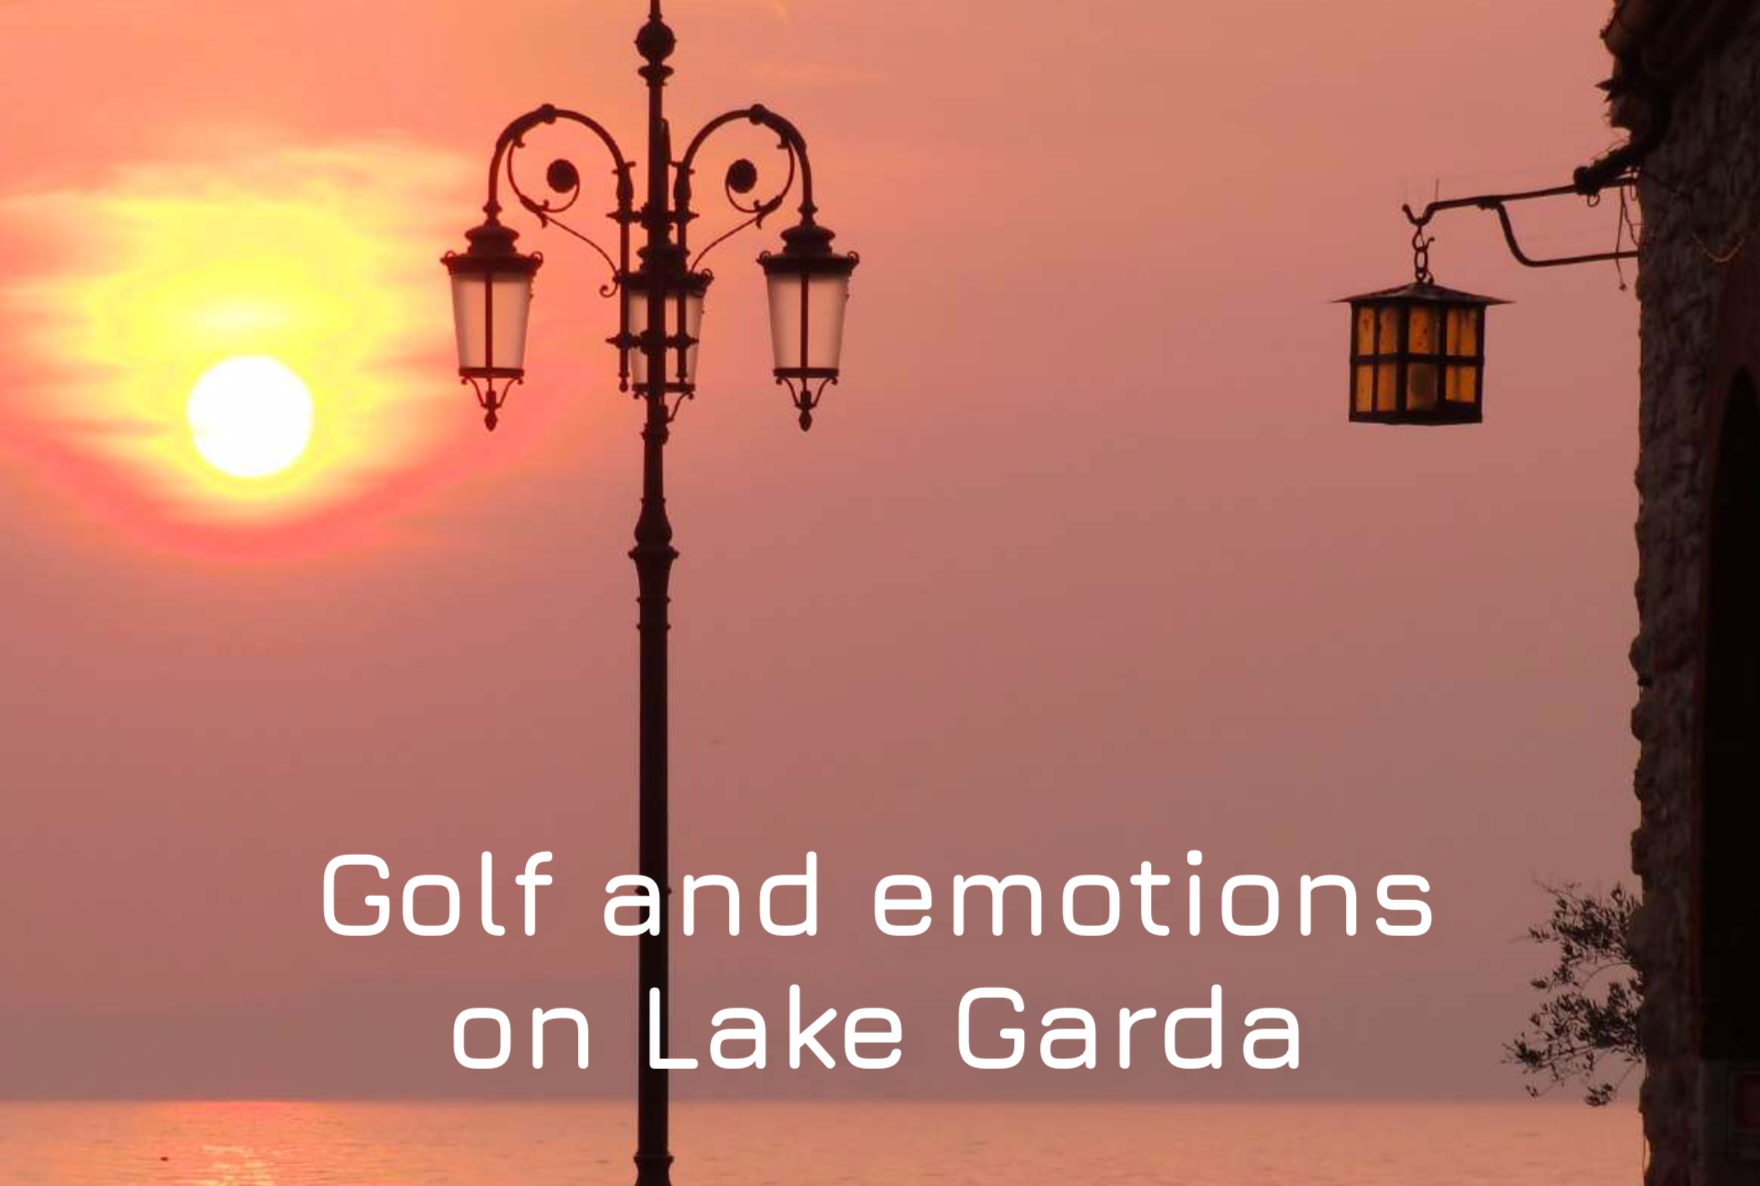 golf and emotions on lake garda - experience - italy4golf